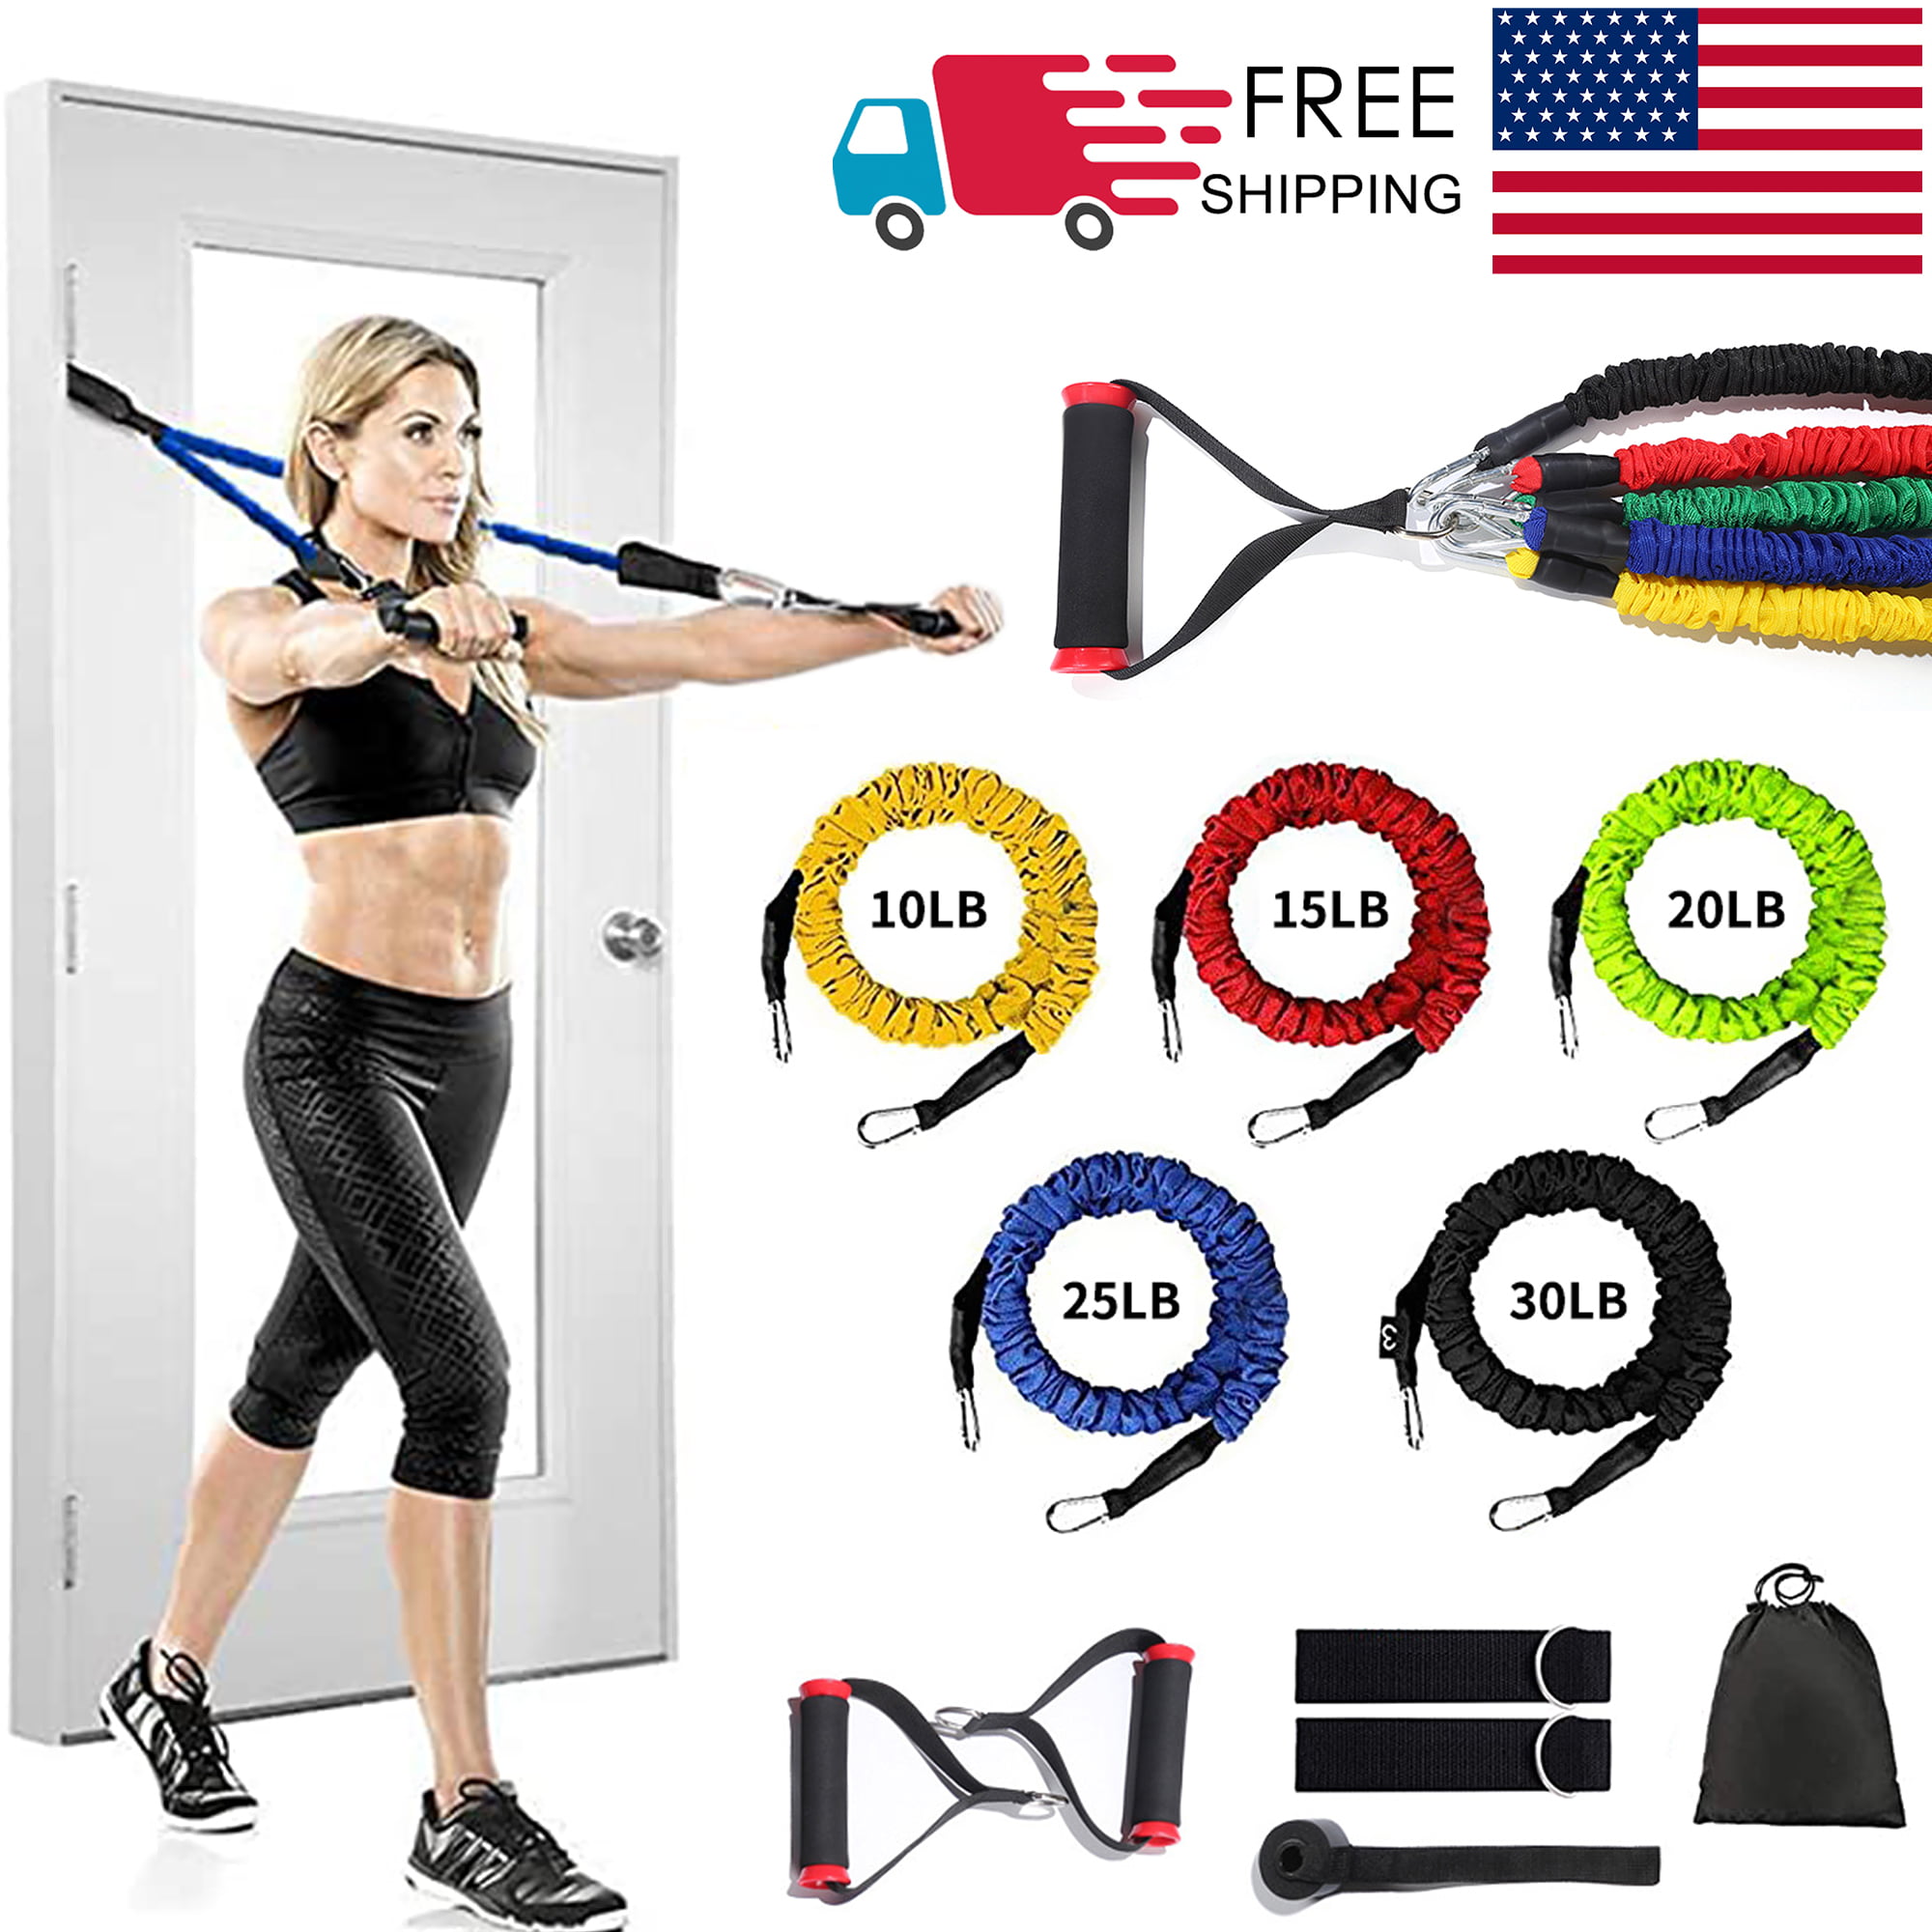 Medium Ankle Resistance Band Help Build & Tone Muscle New Free Shipping 